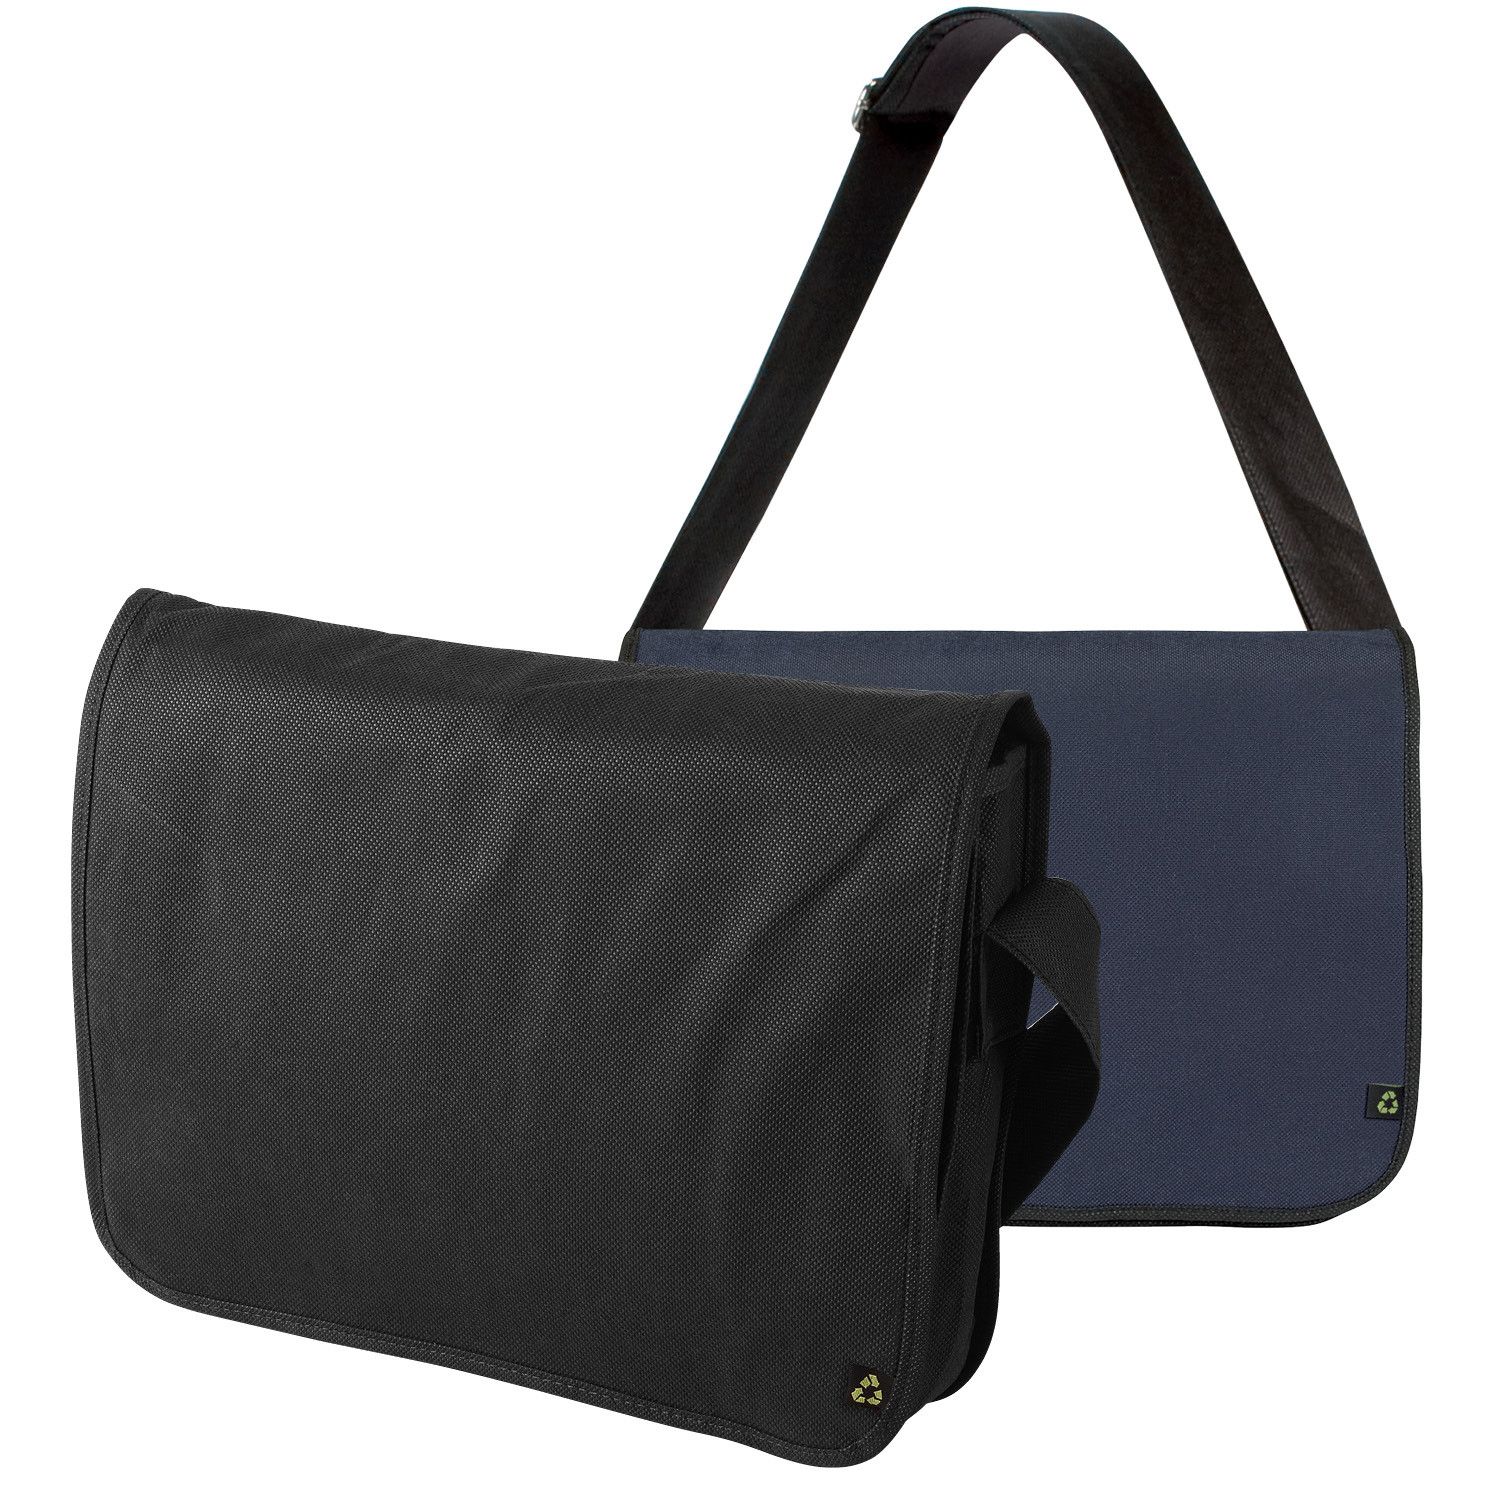 Business Satchel In Non Woven Material